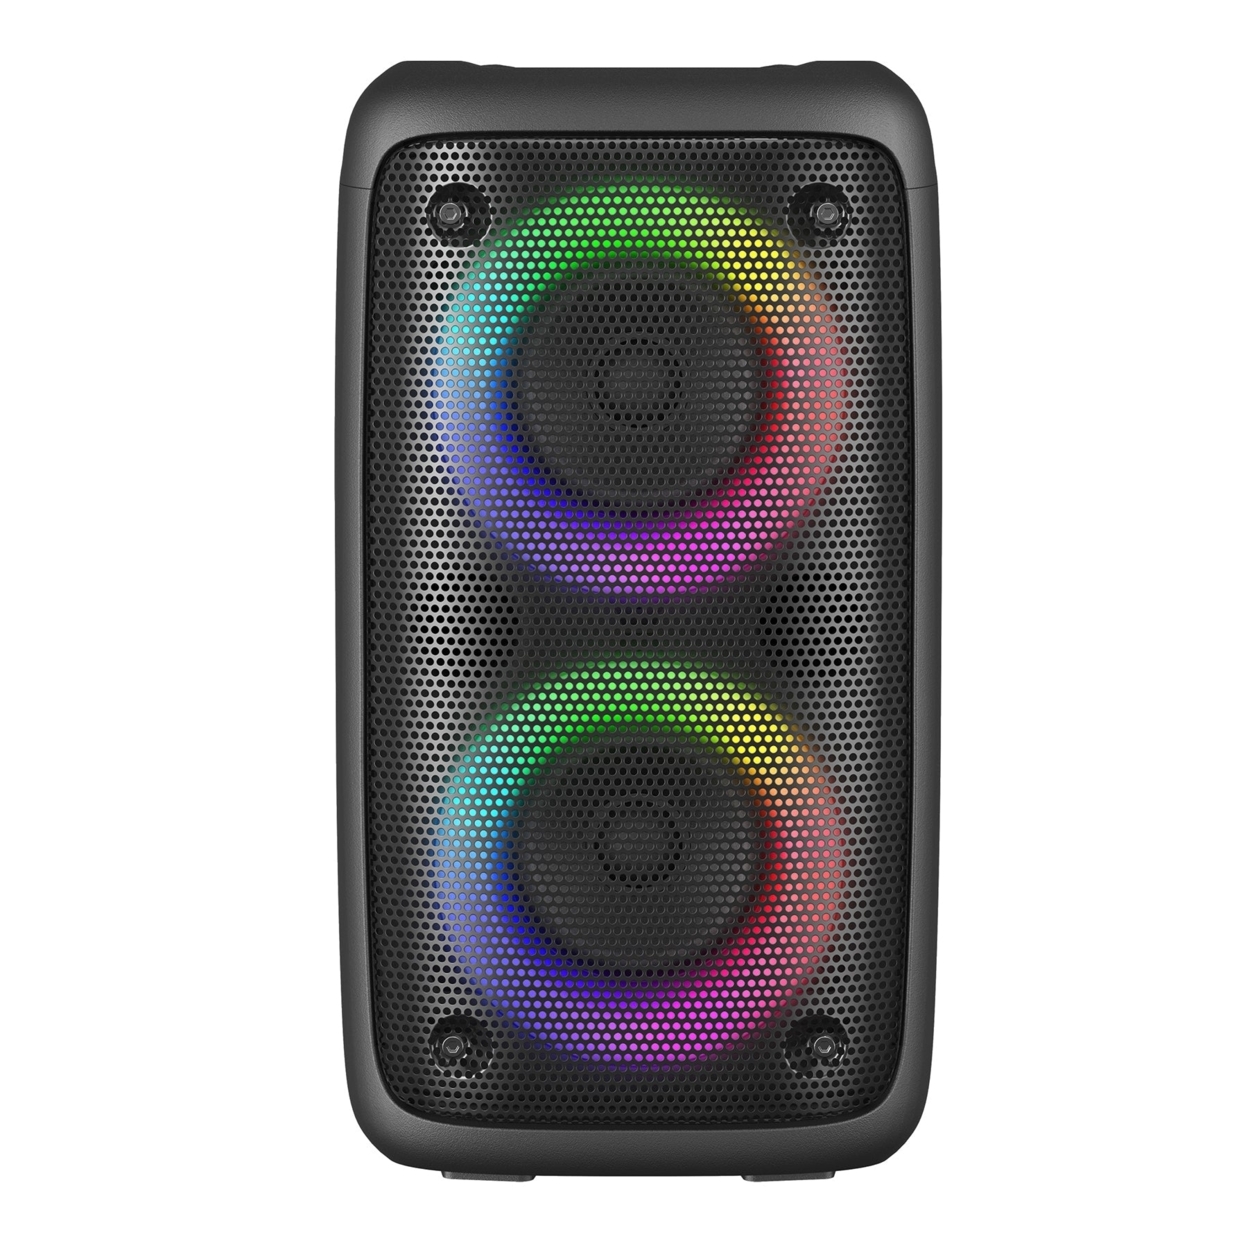 2 X 3 High Efficiency Speaker With LED Lights & Multi-Connectivity (IQ-1933BT)